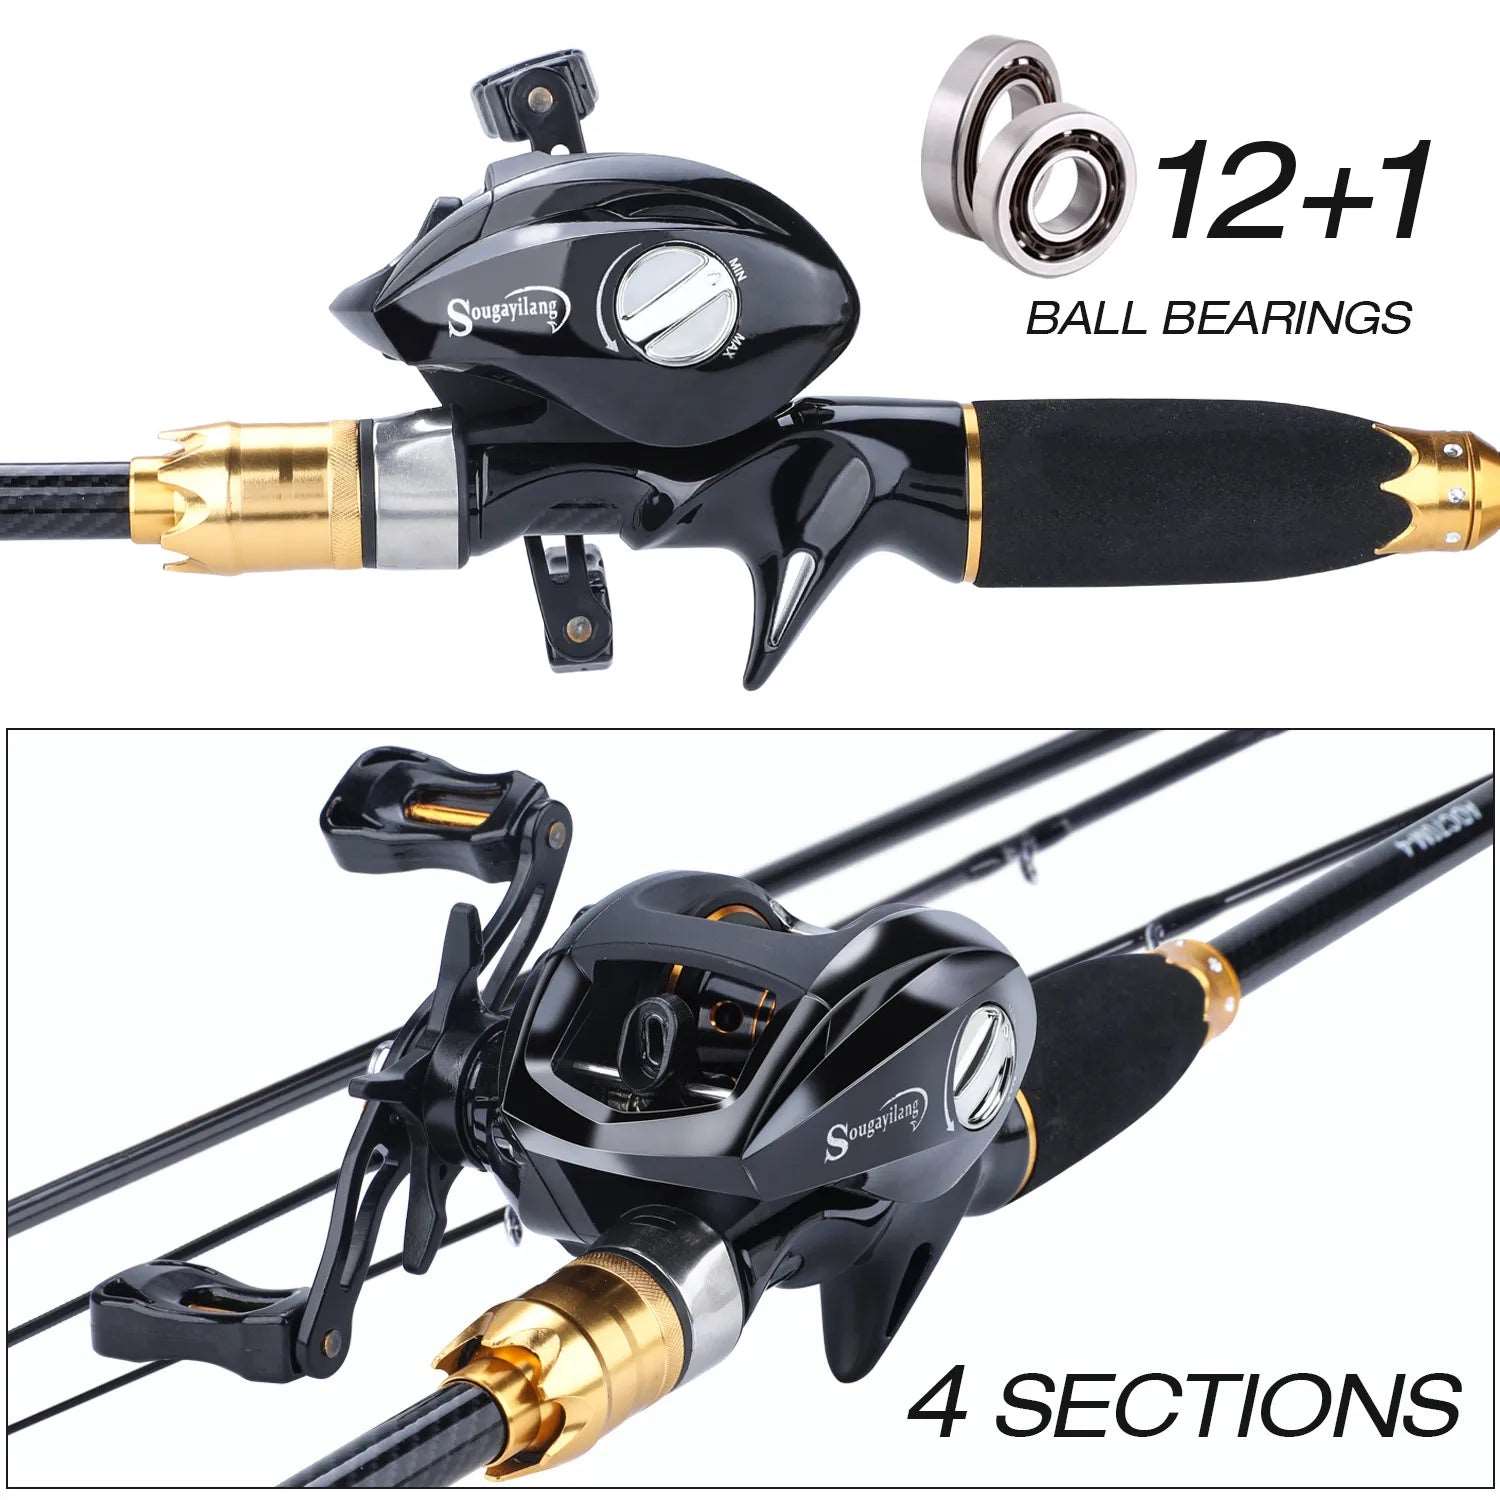 Complete Carbon Fishing Rod Kit - 1.8m & 2.1m Options with Accessories - Betatton - 